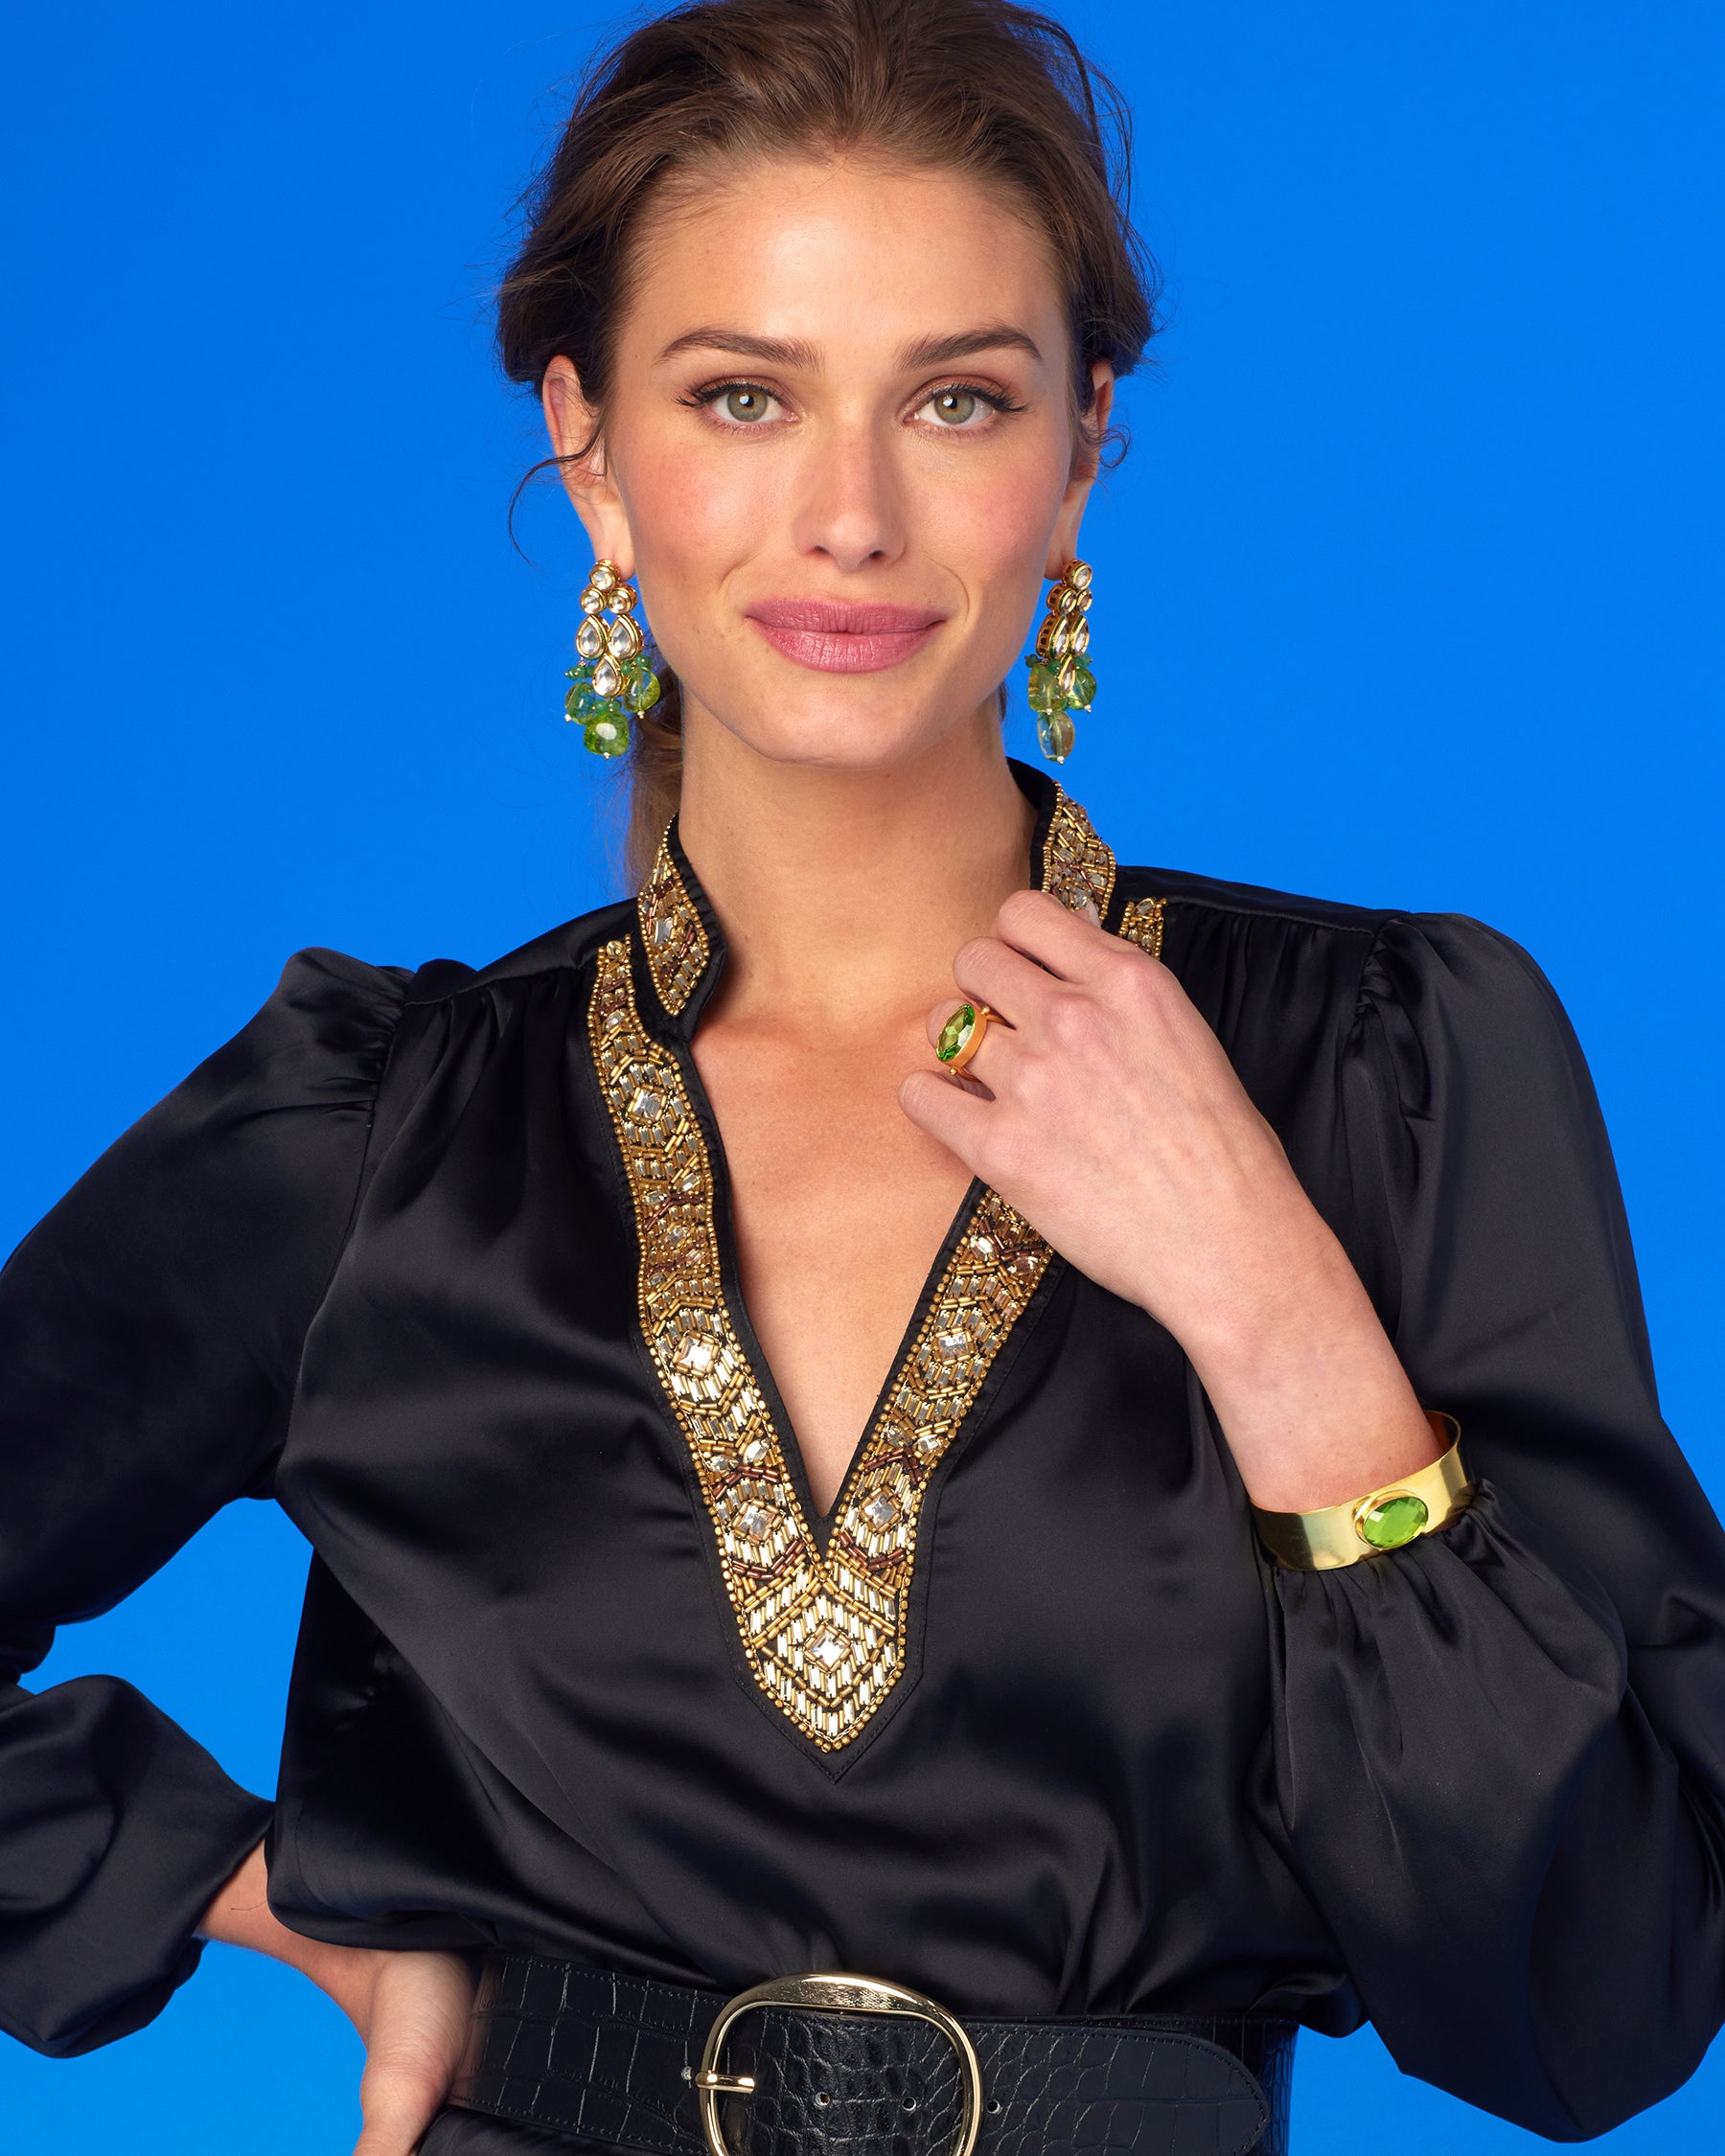 Ravenna Statement Cuff Bracelet in Radiant Lime-Wearing the Anastasia Blouse in Black and Art Deco Embellishment